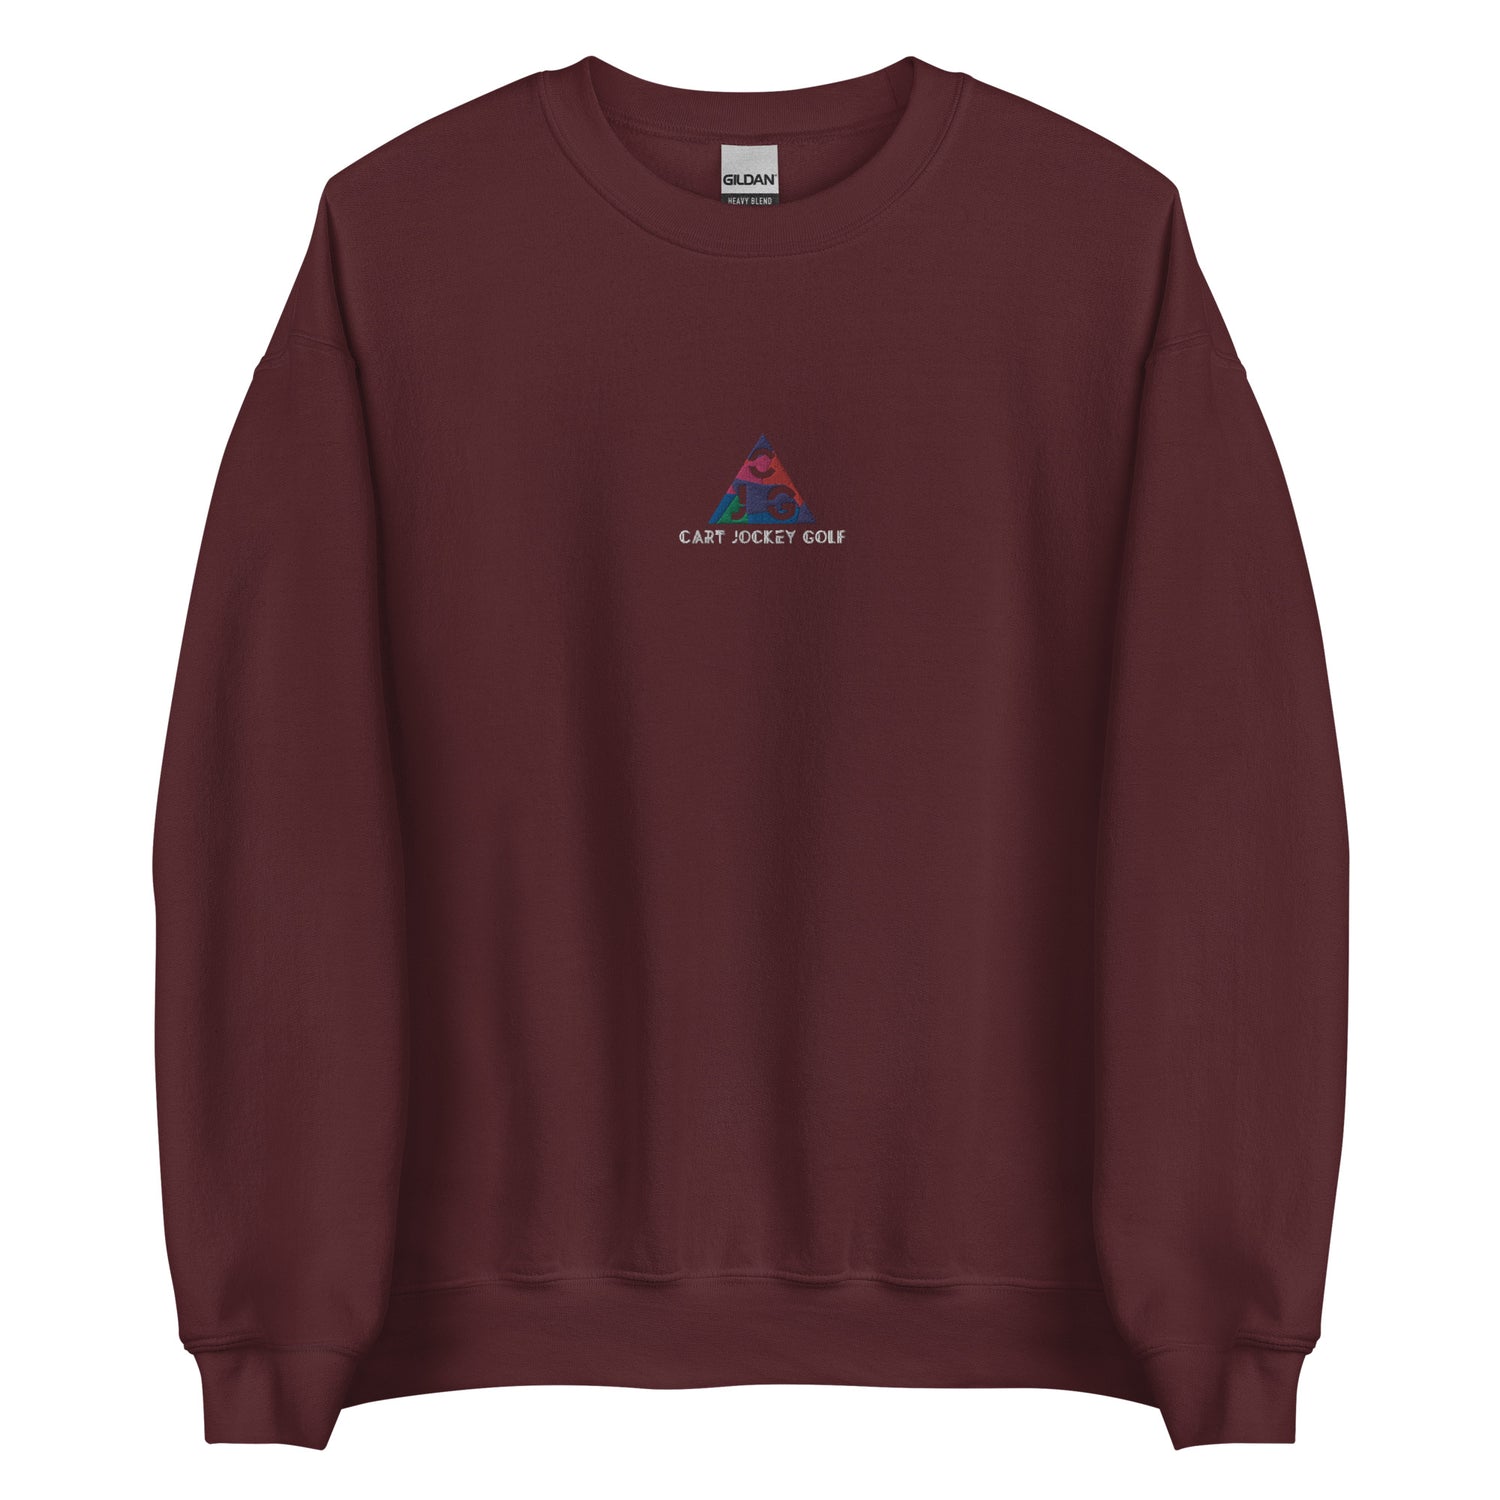 a Triangle Embroidered Crewneck sweatshirt with the word mountain on it from Cart Jockey Golf.